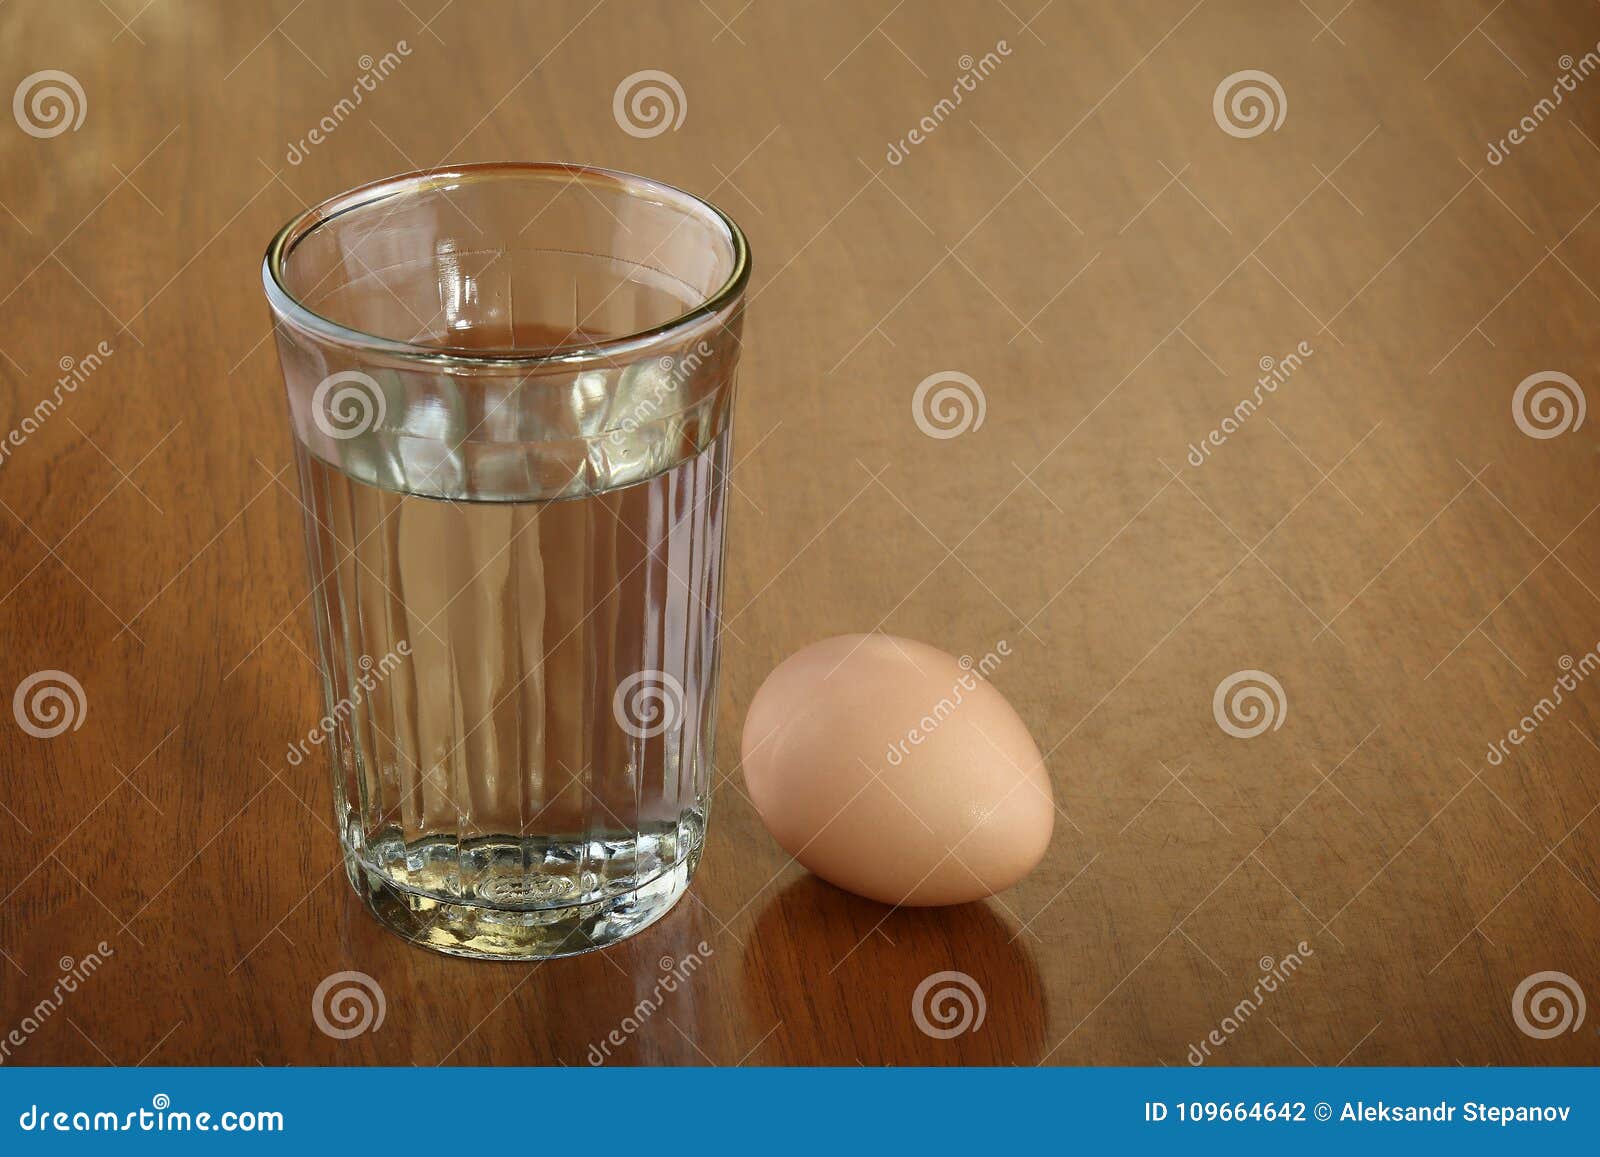 A Full Glass Of Water And One Egg On Scratched Brown 